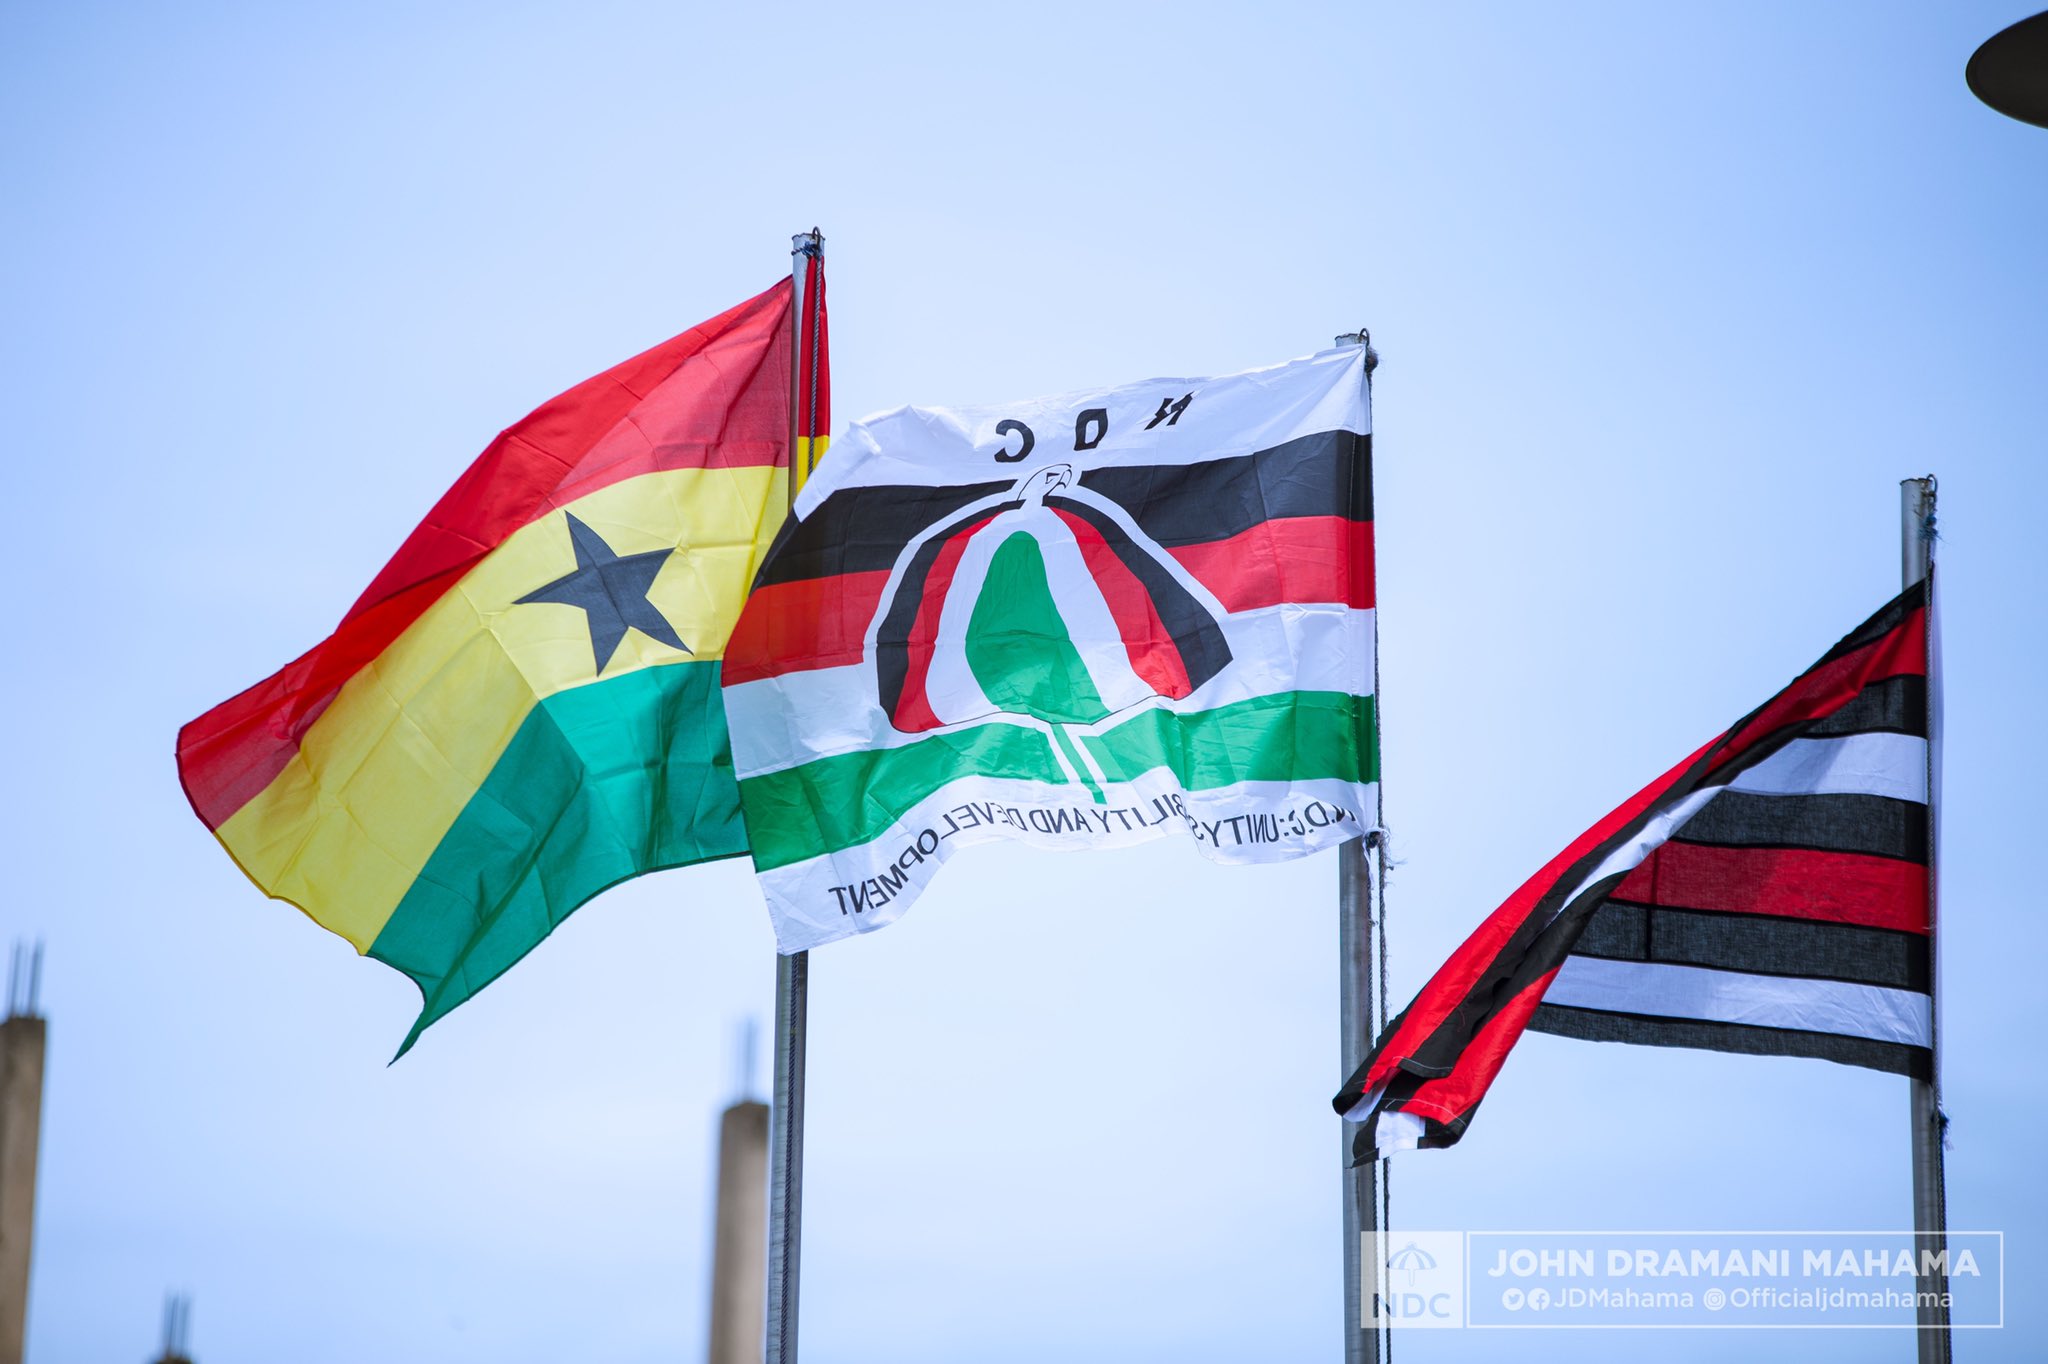 67th Independence Day: NDC calls for renewed commitment to addressing economic challenges